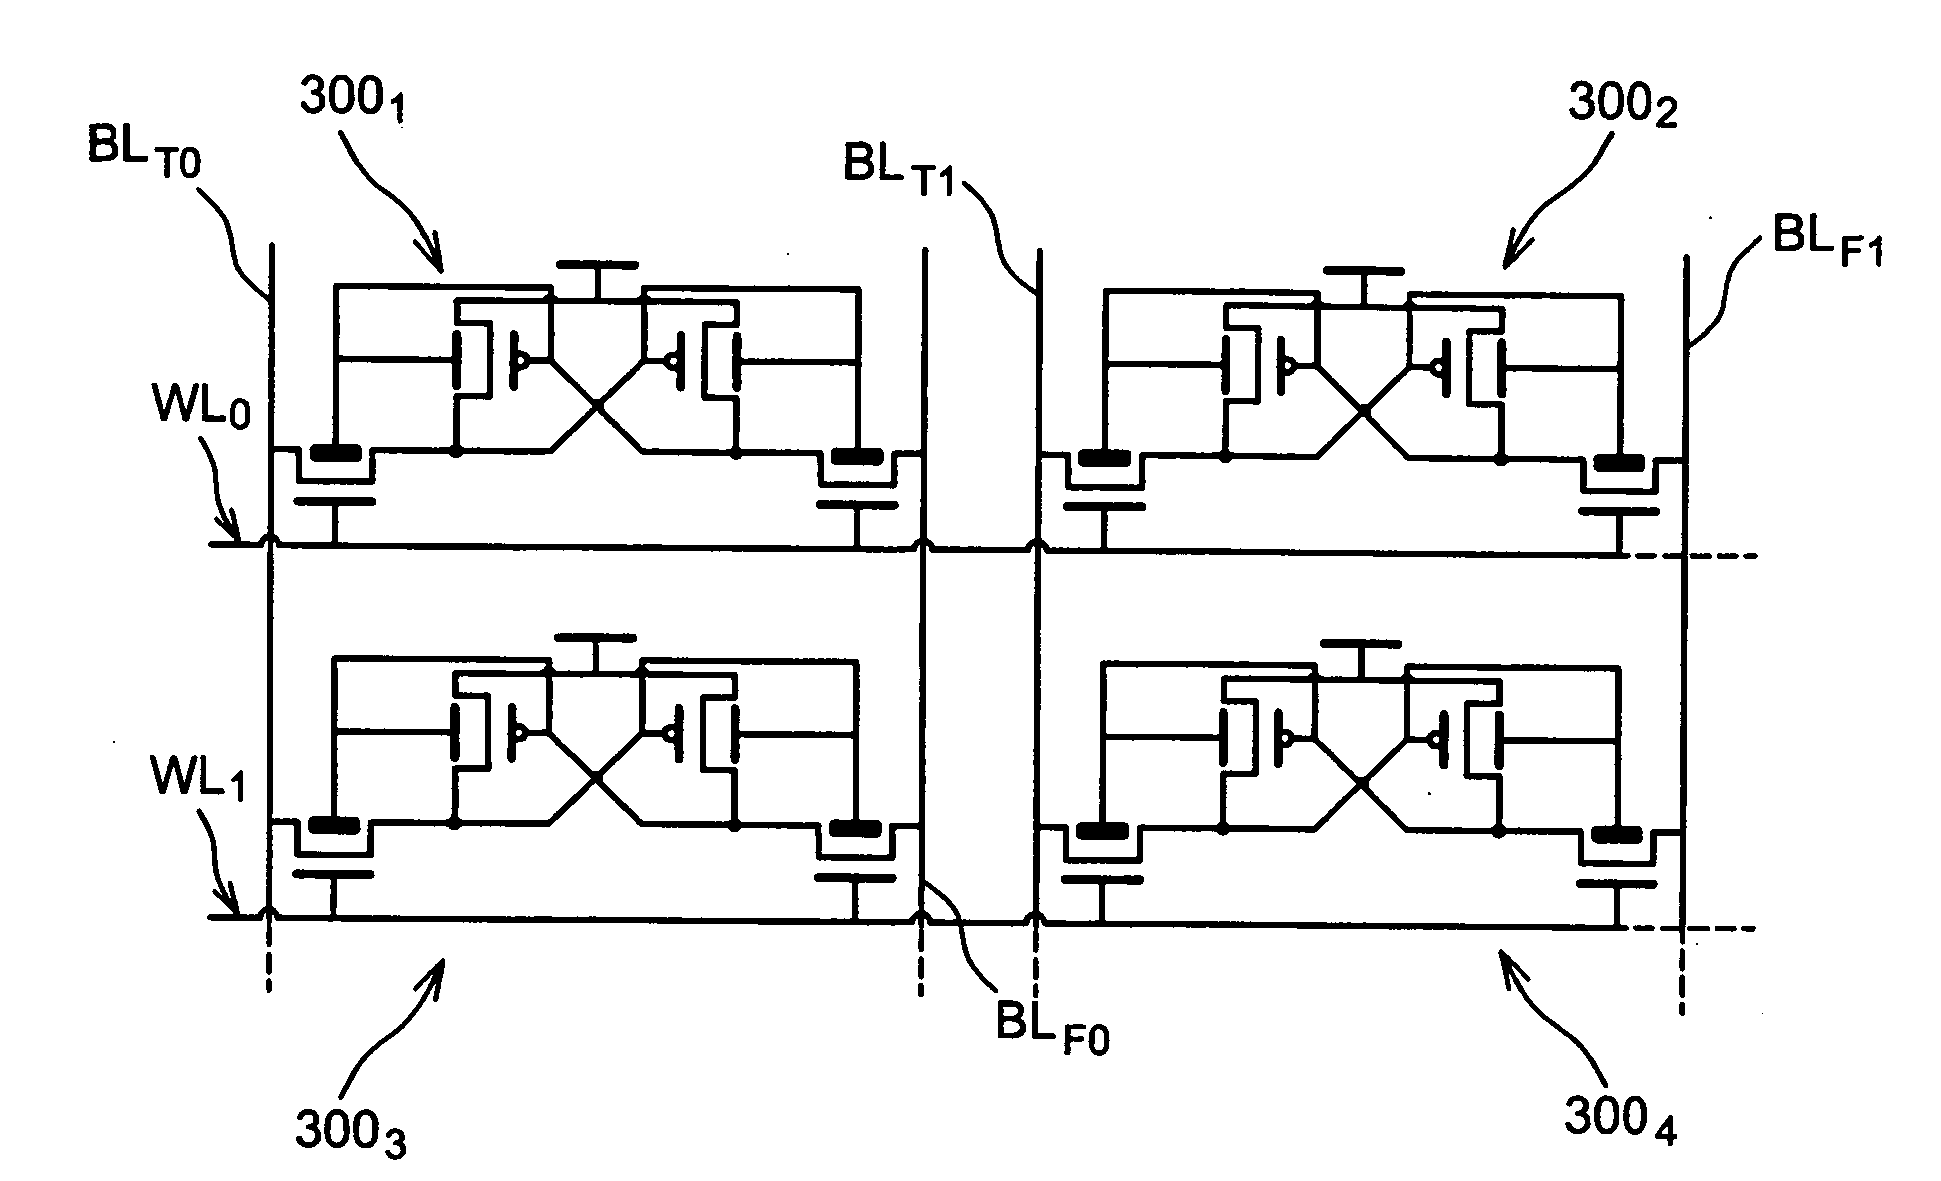 Memory cell provided with dual-gate transistors, with independent asymmetric gates